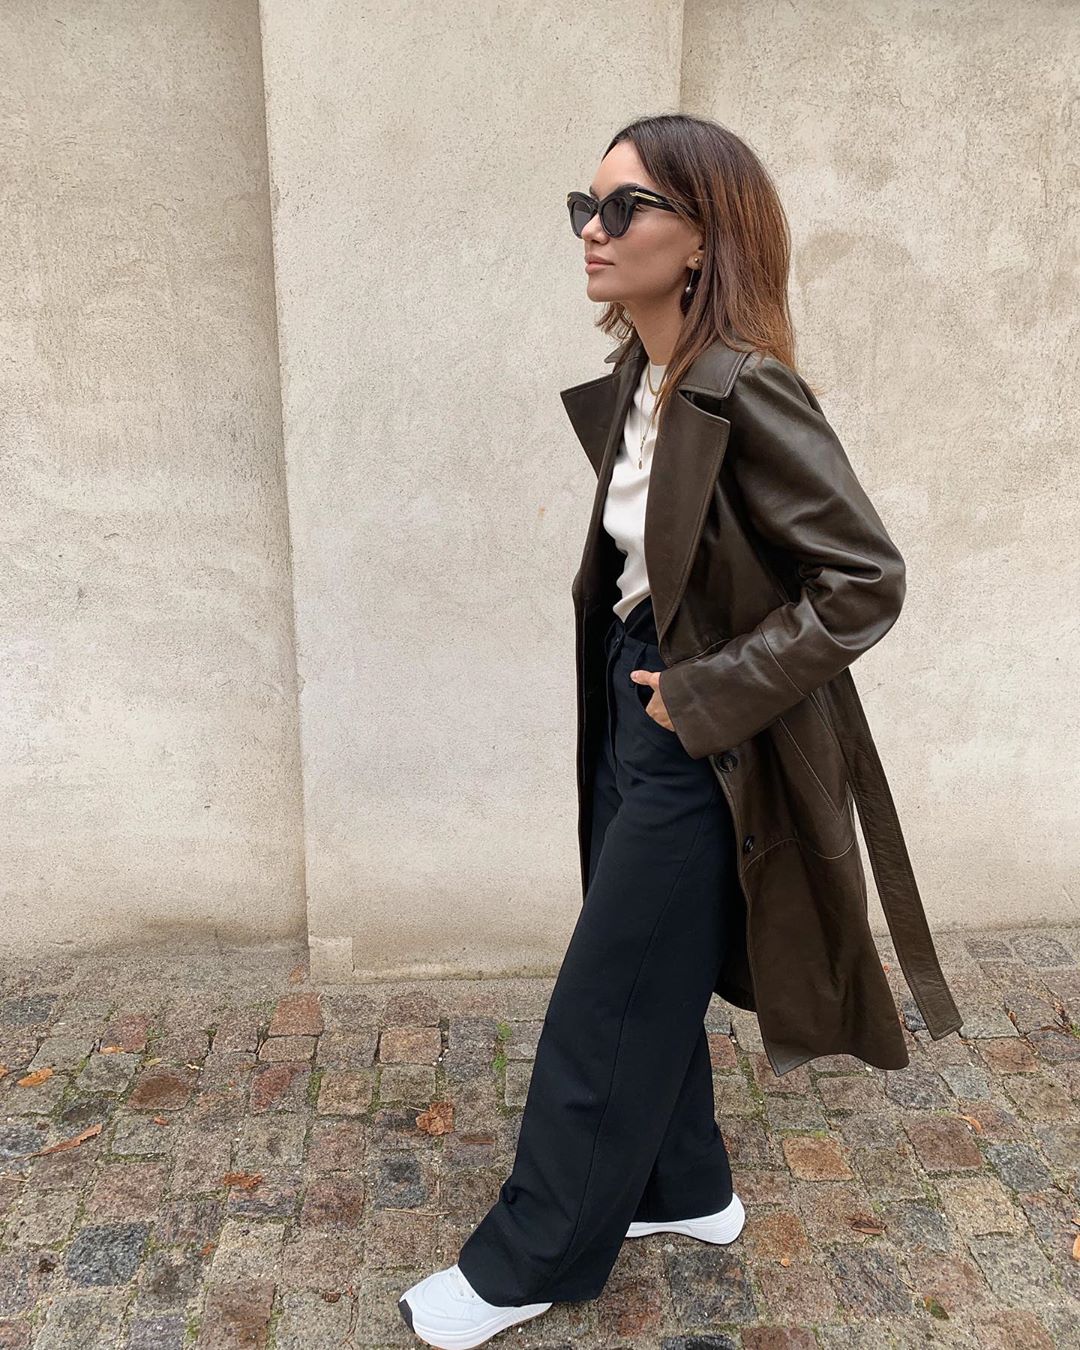 This Founder Wore the Perfect Seasonal Outfit – Leather Trench Coat